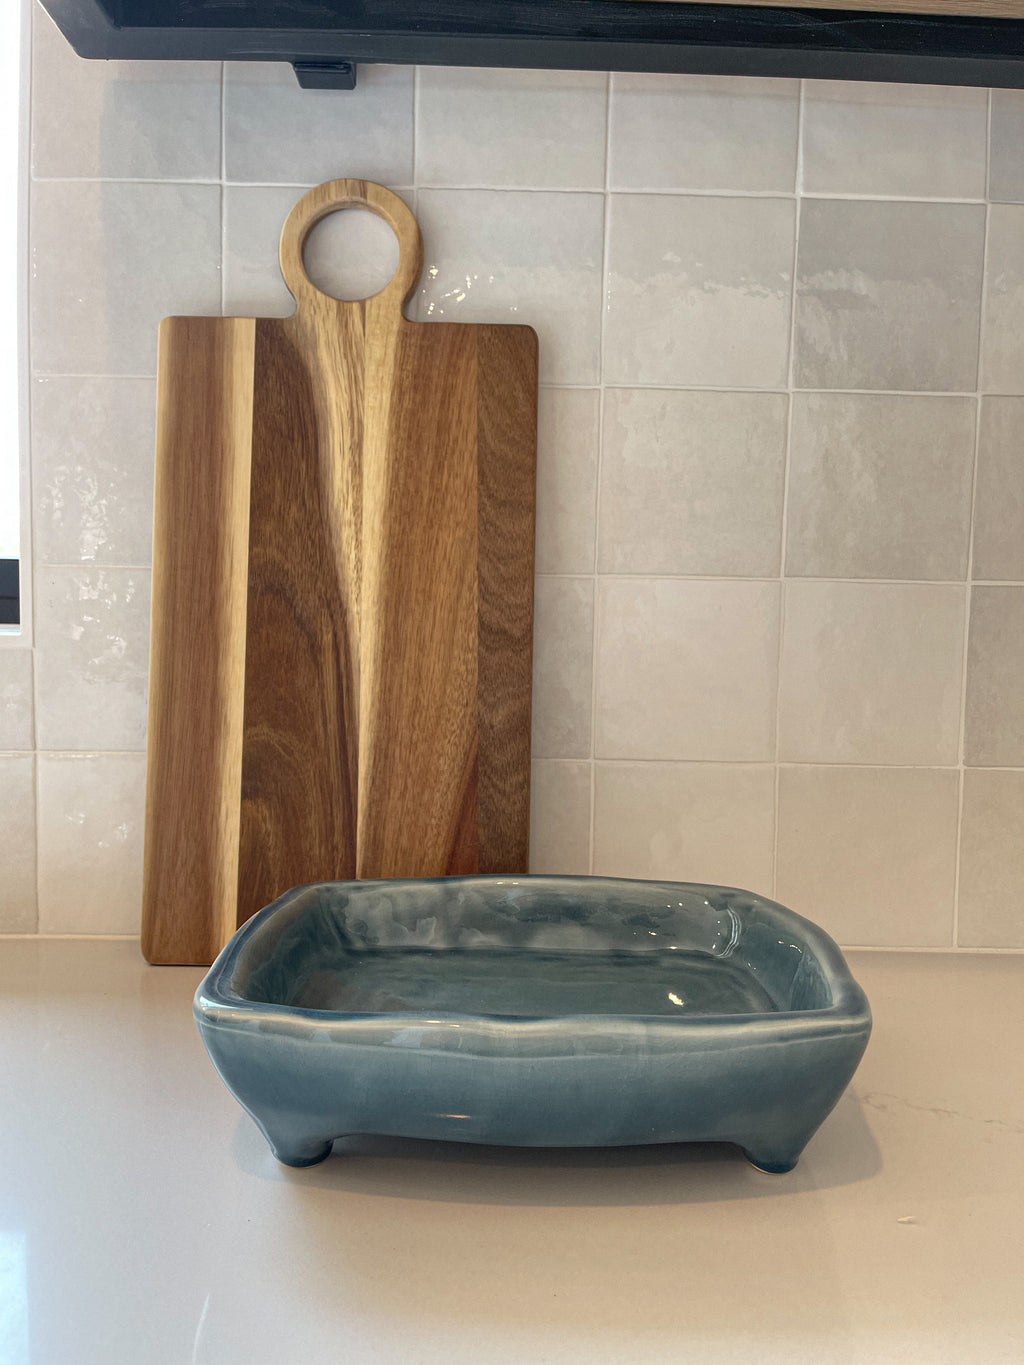 Footed Terracotta Tray with Distressed Finish - LLACIE 